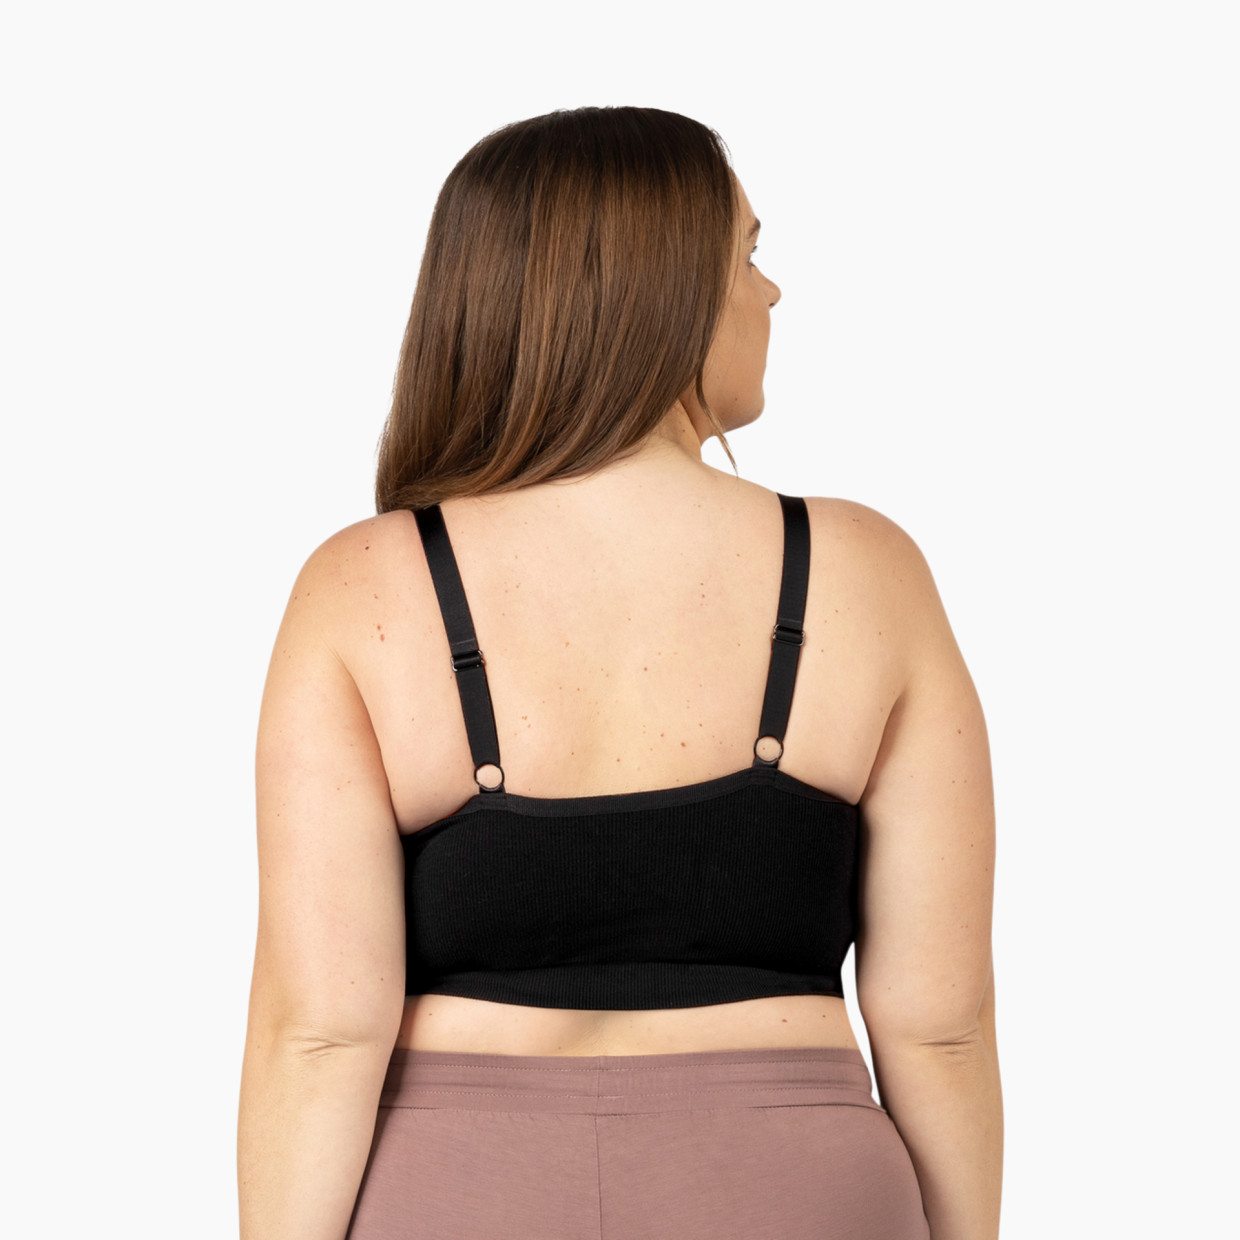 Kindred Bravely Sublime Bamboo Hands-Free Pumping Lounge & Sleep Bra - Black, Xx-Large-Busty.